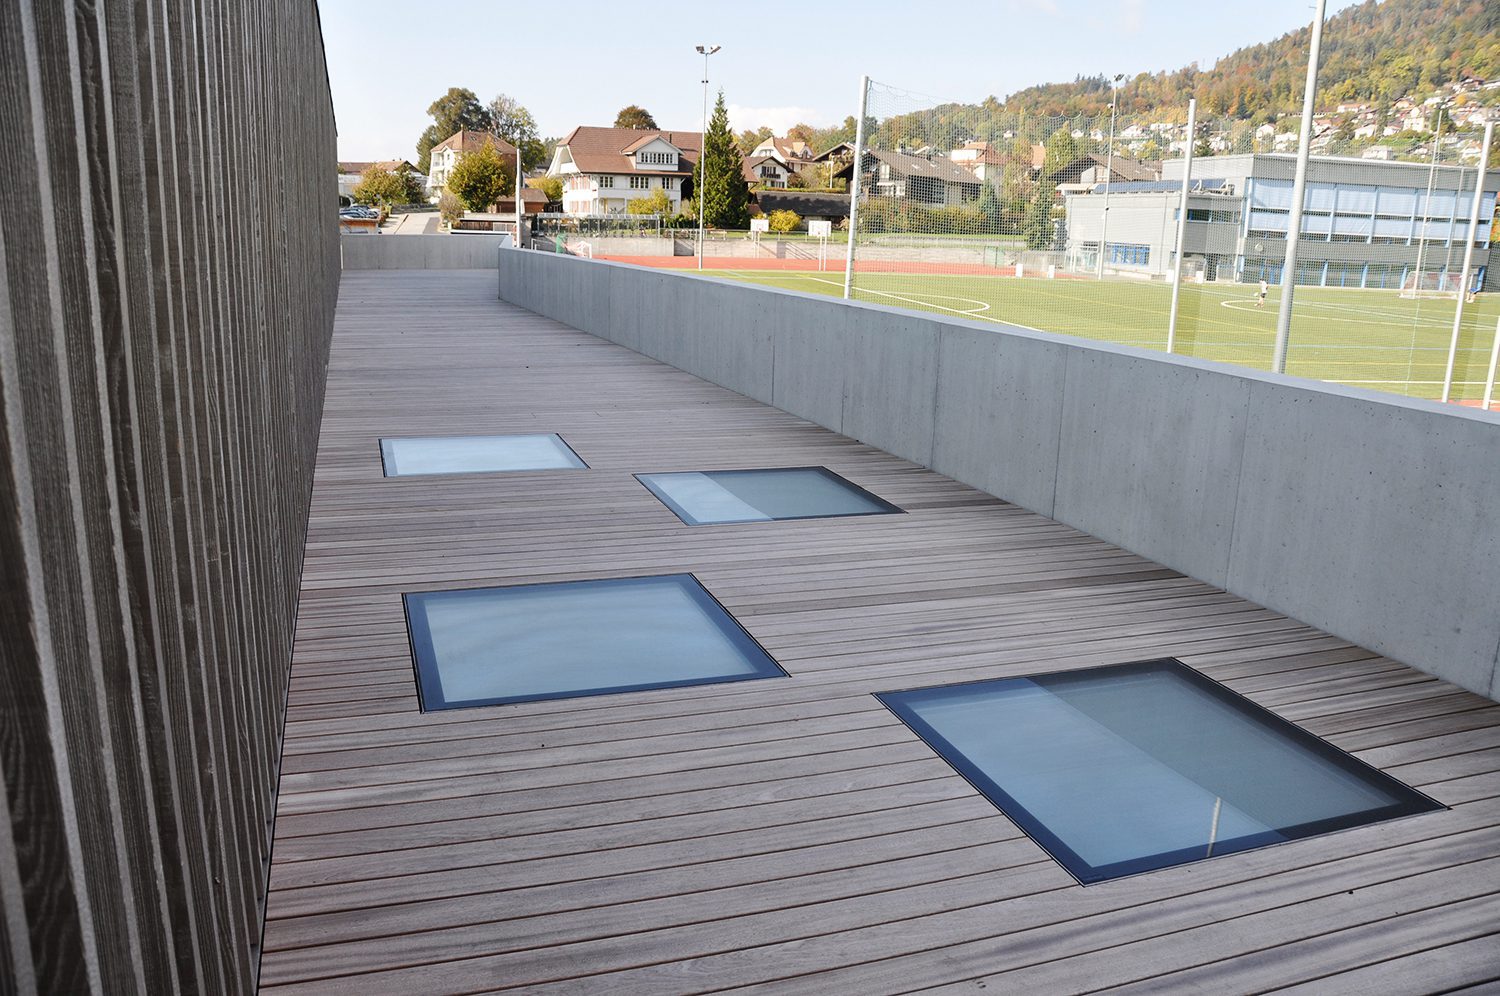 Walkable skylights for more daylight in the basement - Hünibach fire station and depot - daylight solutions - Glassfloor Heliobus AG